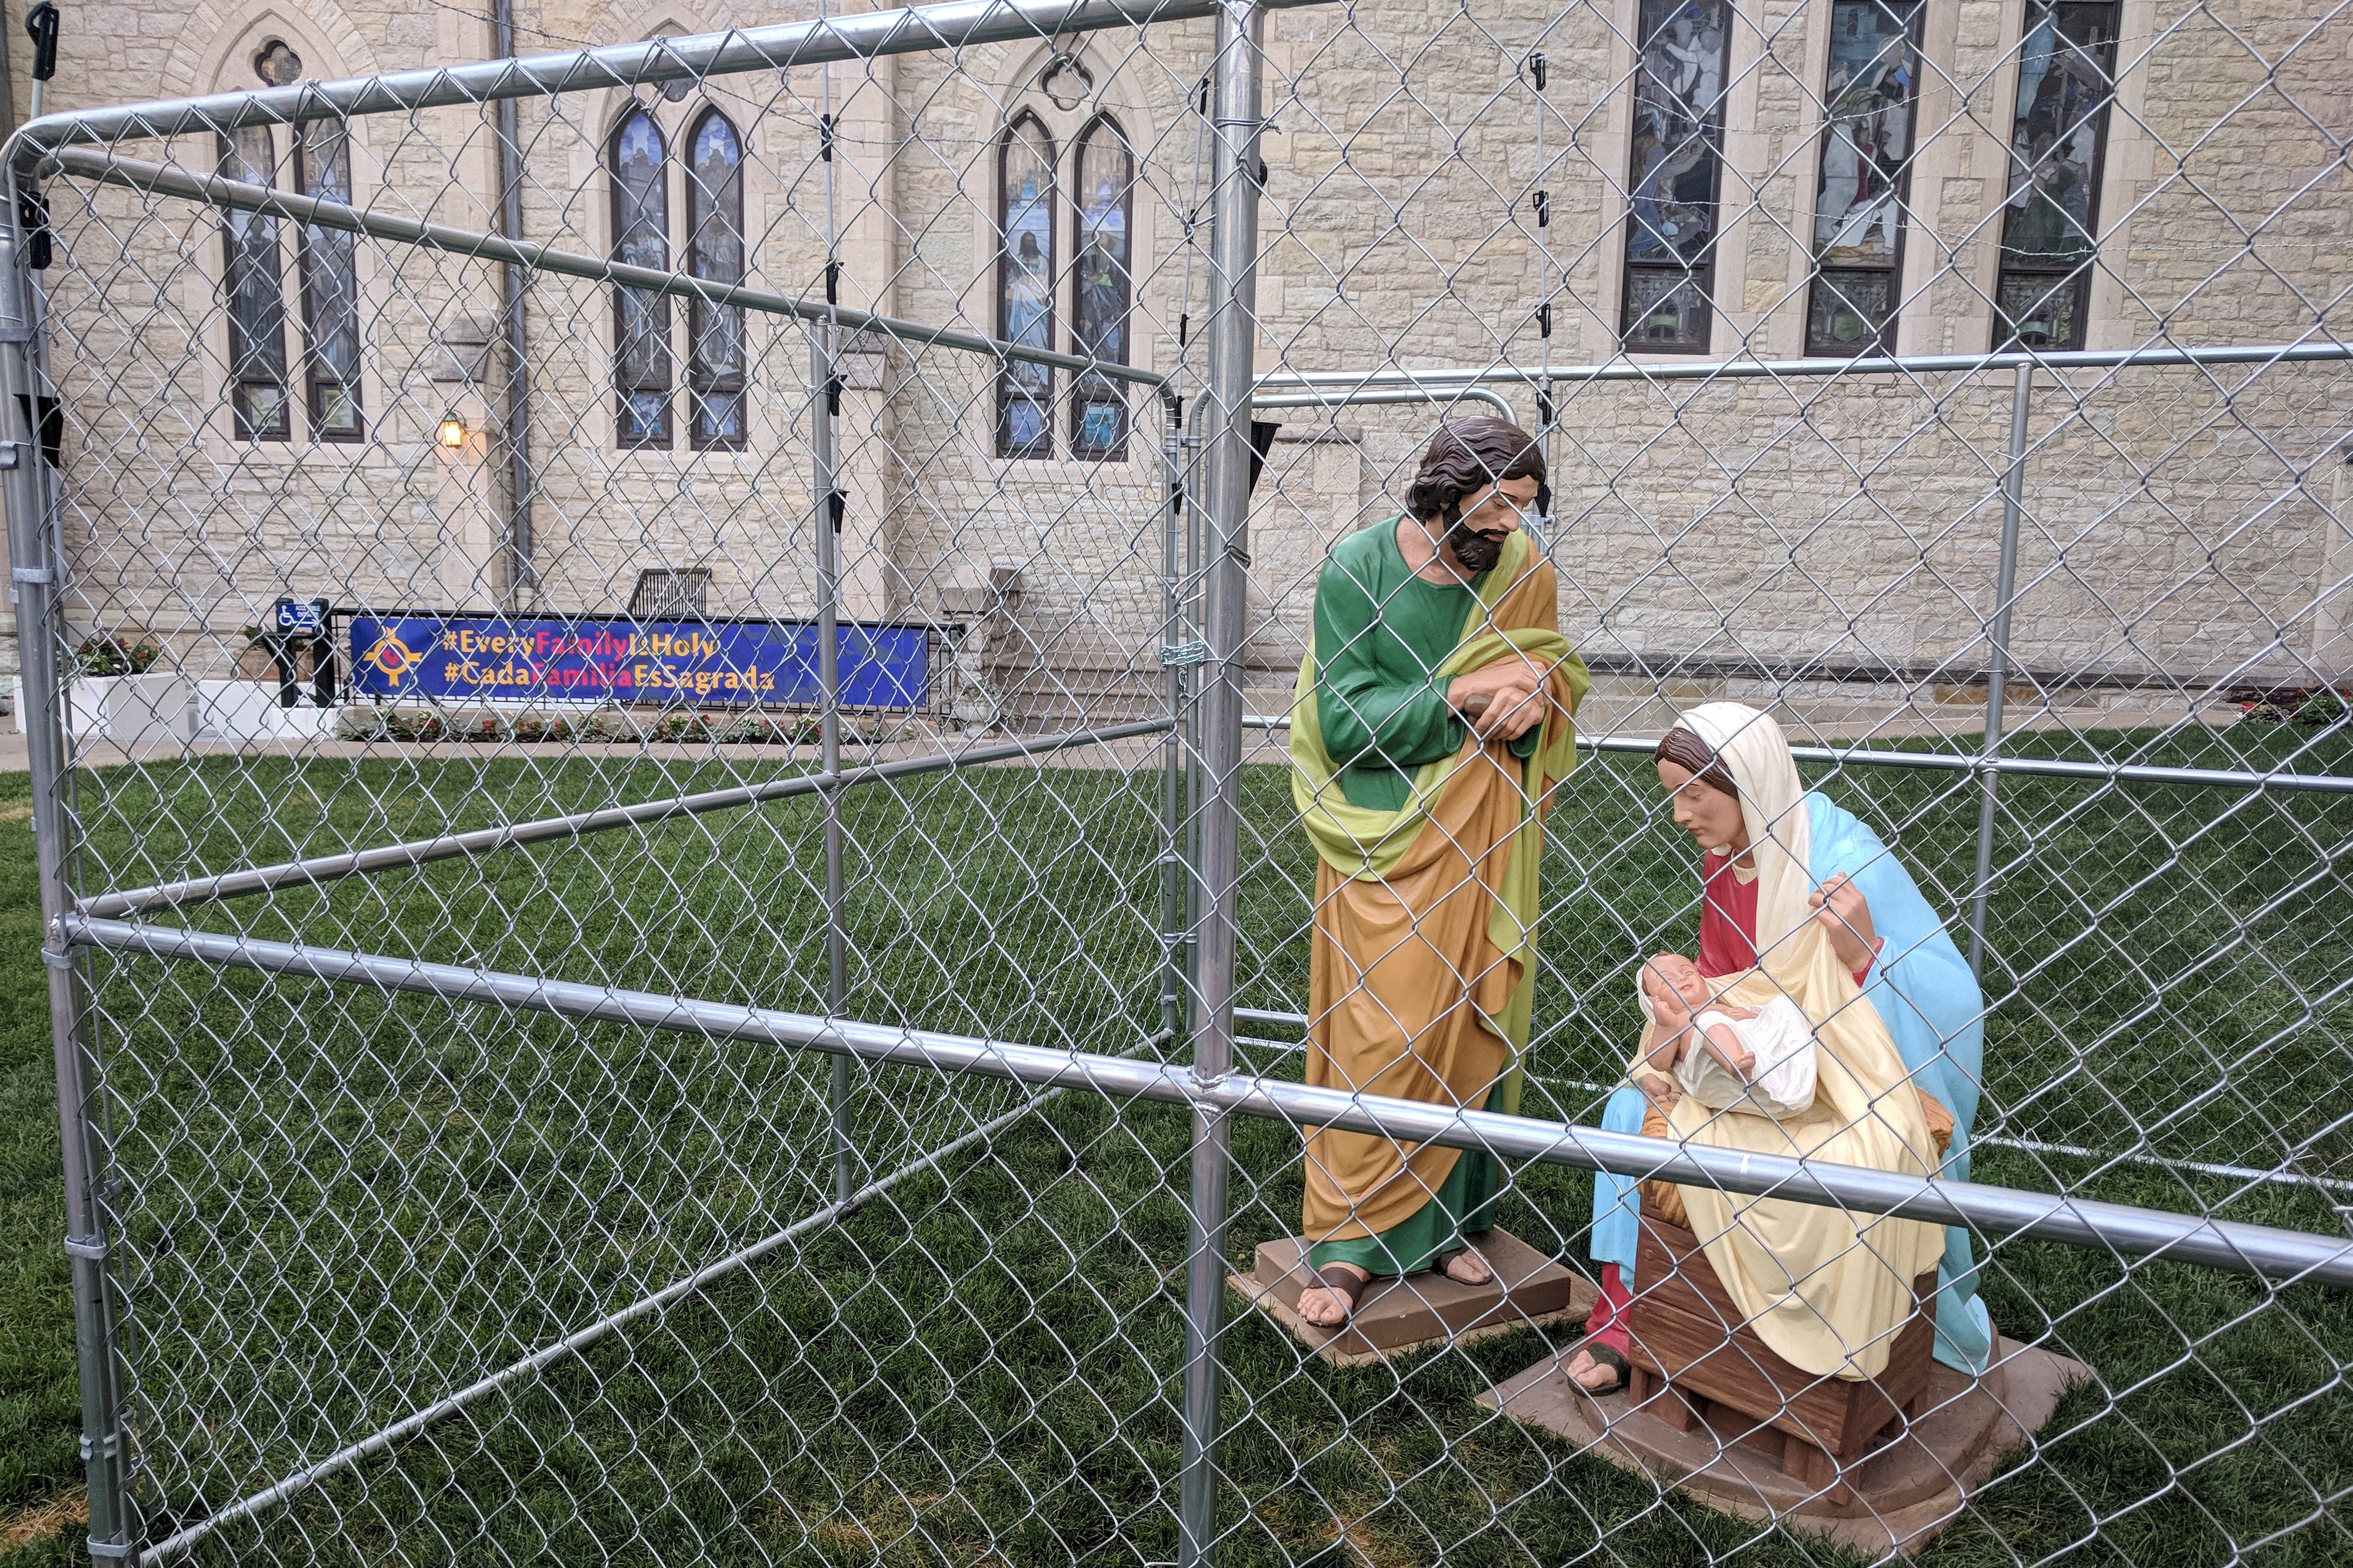 The statues of Jesus, Mary, and Joseph are seen in a cage as a protest of child separation policy, in Indianapolis, Indiana on July 2, 2018.